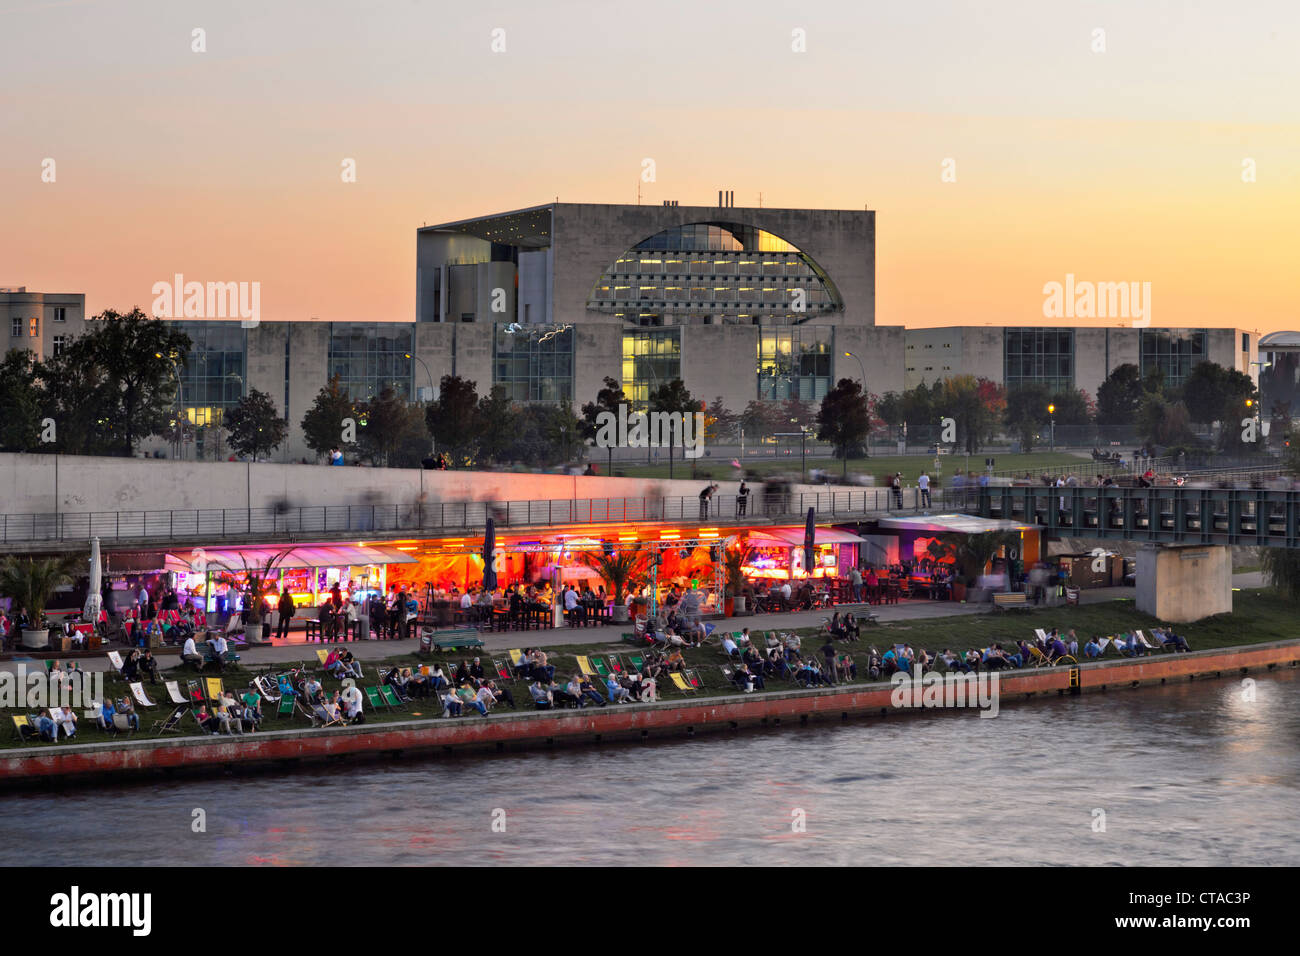 Capital beach cafe at the banks of river Spree, new federal chancellery at dusk, Berlin, Germany, Europe Stock Photo